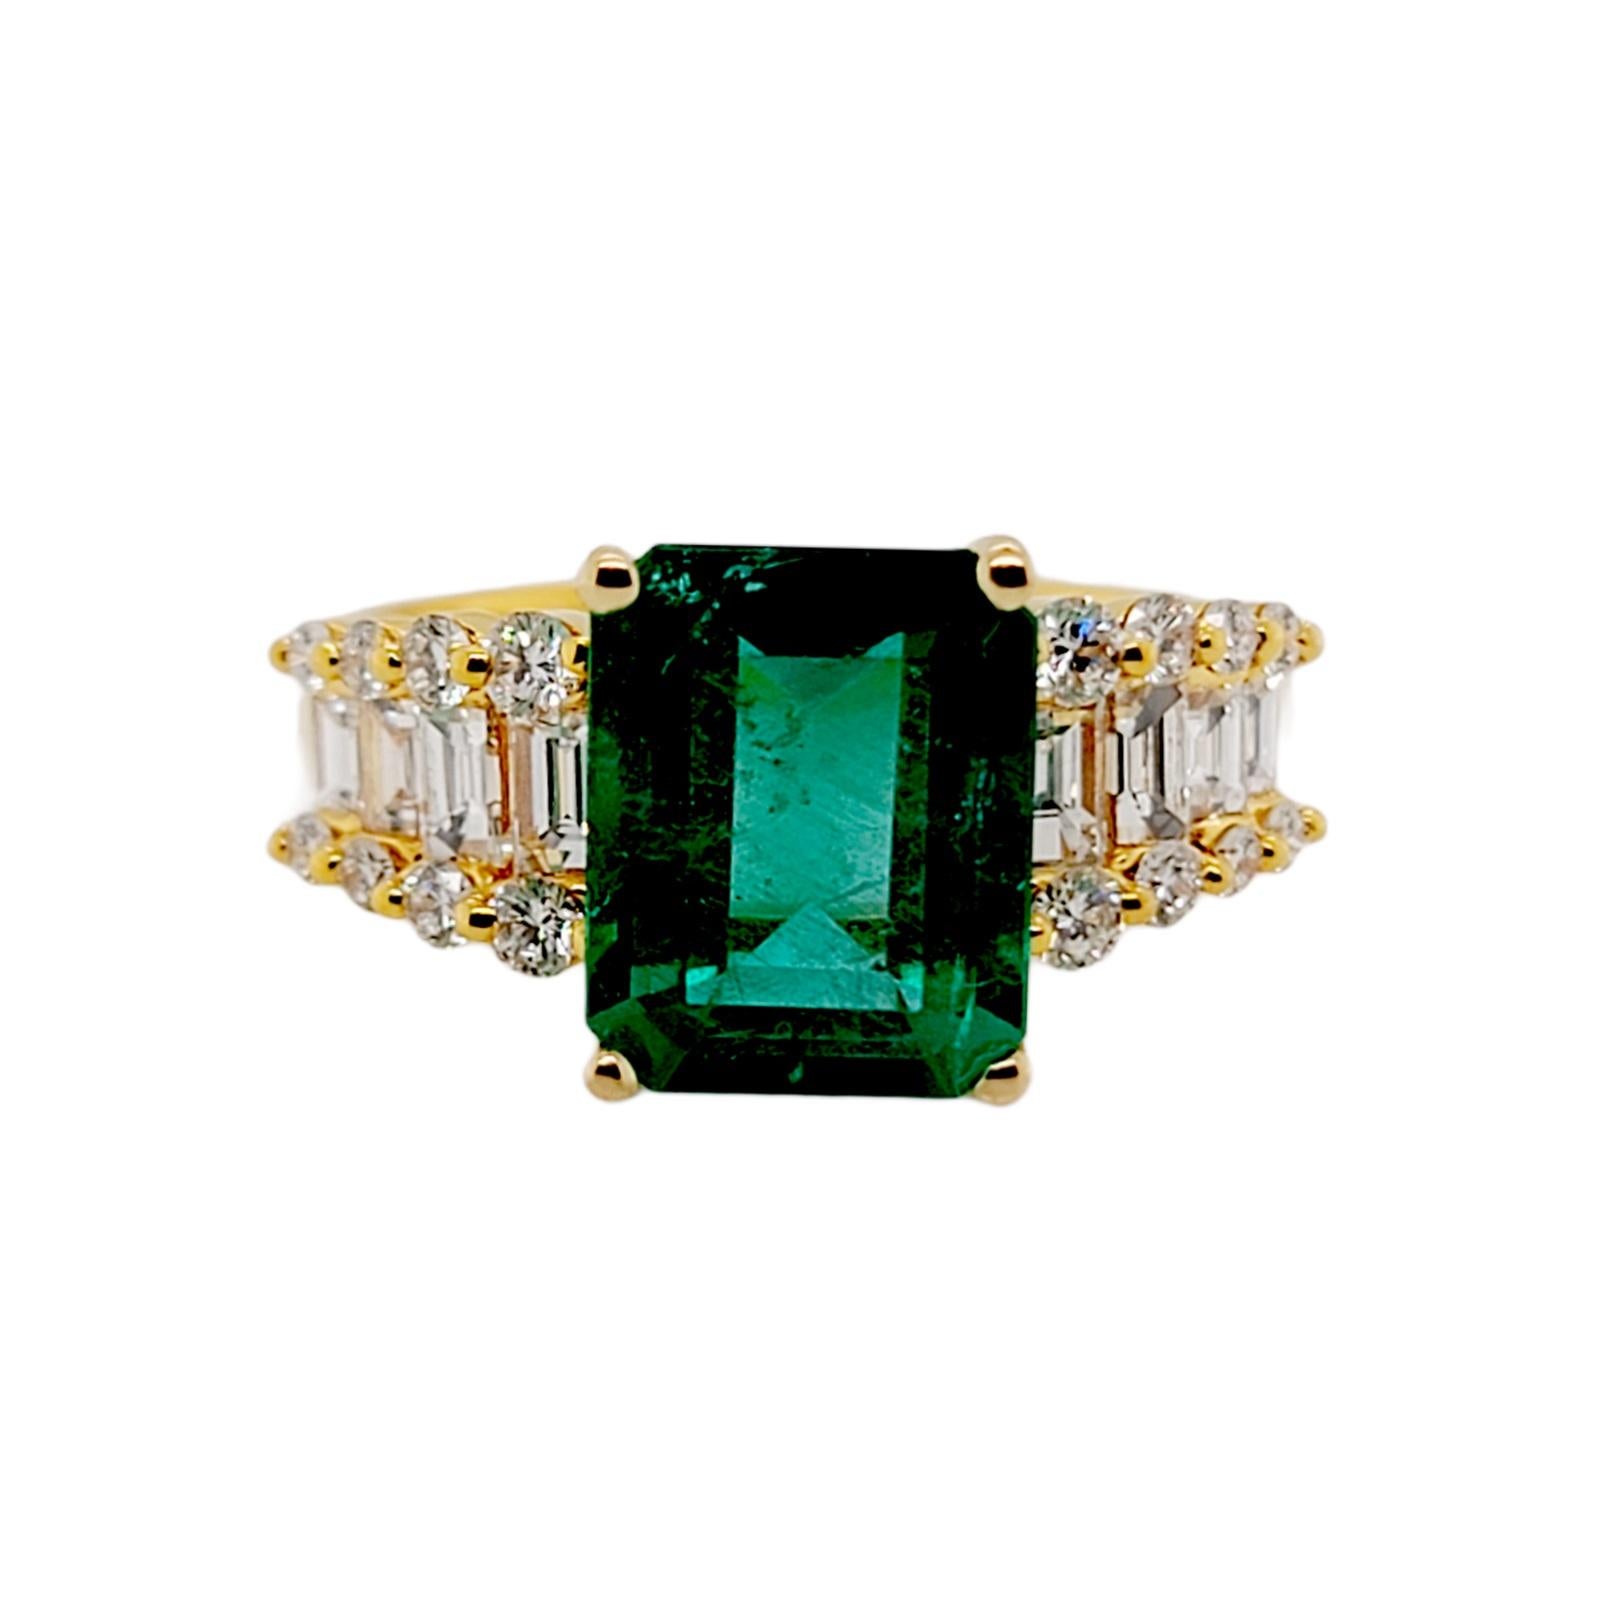 100% Authentic, 100% Customer Satisfaction

Height: 10 mm

Band Width: 2.5 mm

Size: 6.5 ( Contact Us for Sizing)

Metal:18K Yellow Gold

Hallmarks: 18K

Total Weight: 4.5 Grams

Stone Type: 2.58 CT Zambian Emerald & 1.03 CT Diamonds

Condition: